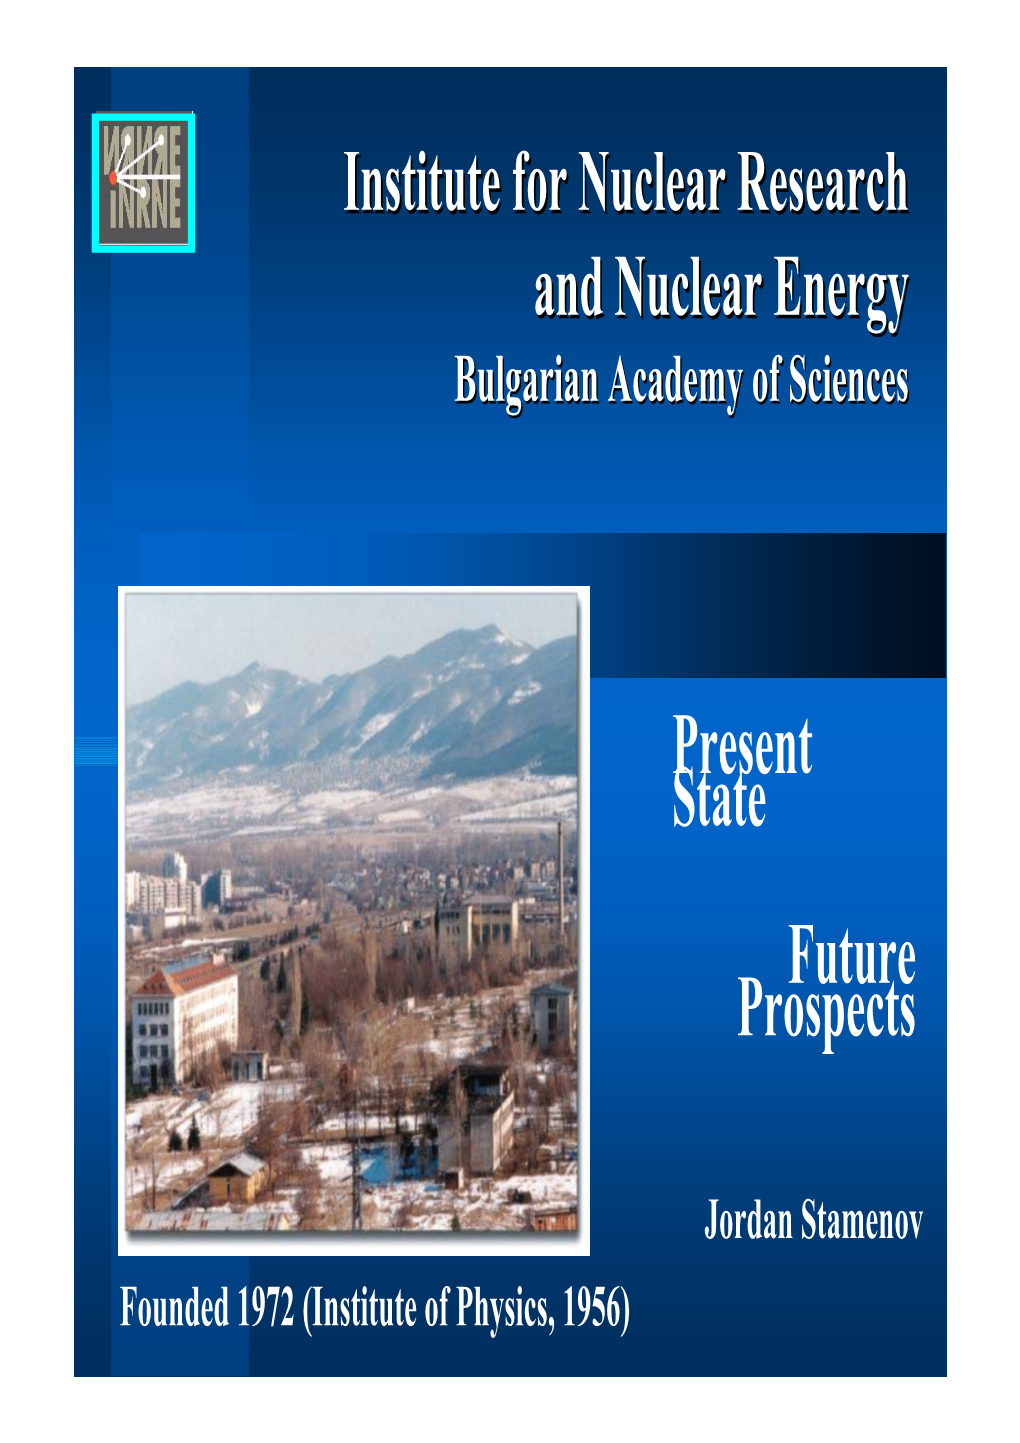 Institute for Nuclear Research and Nuclear Energy Present State